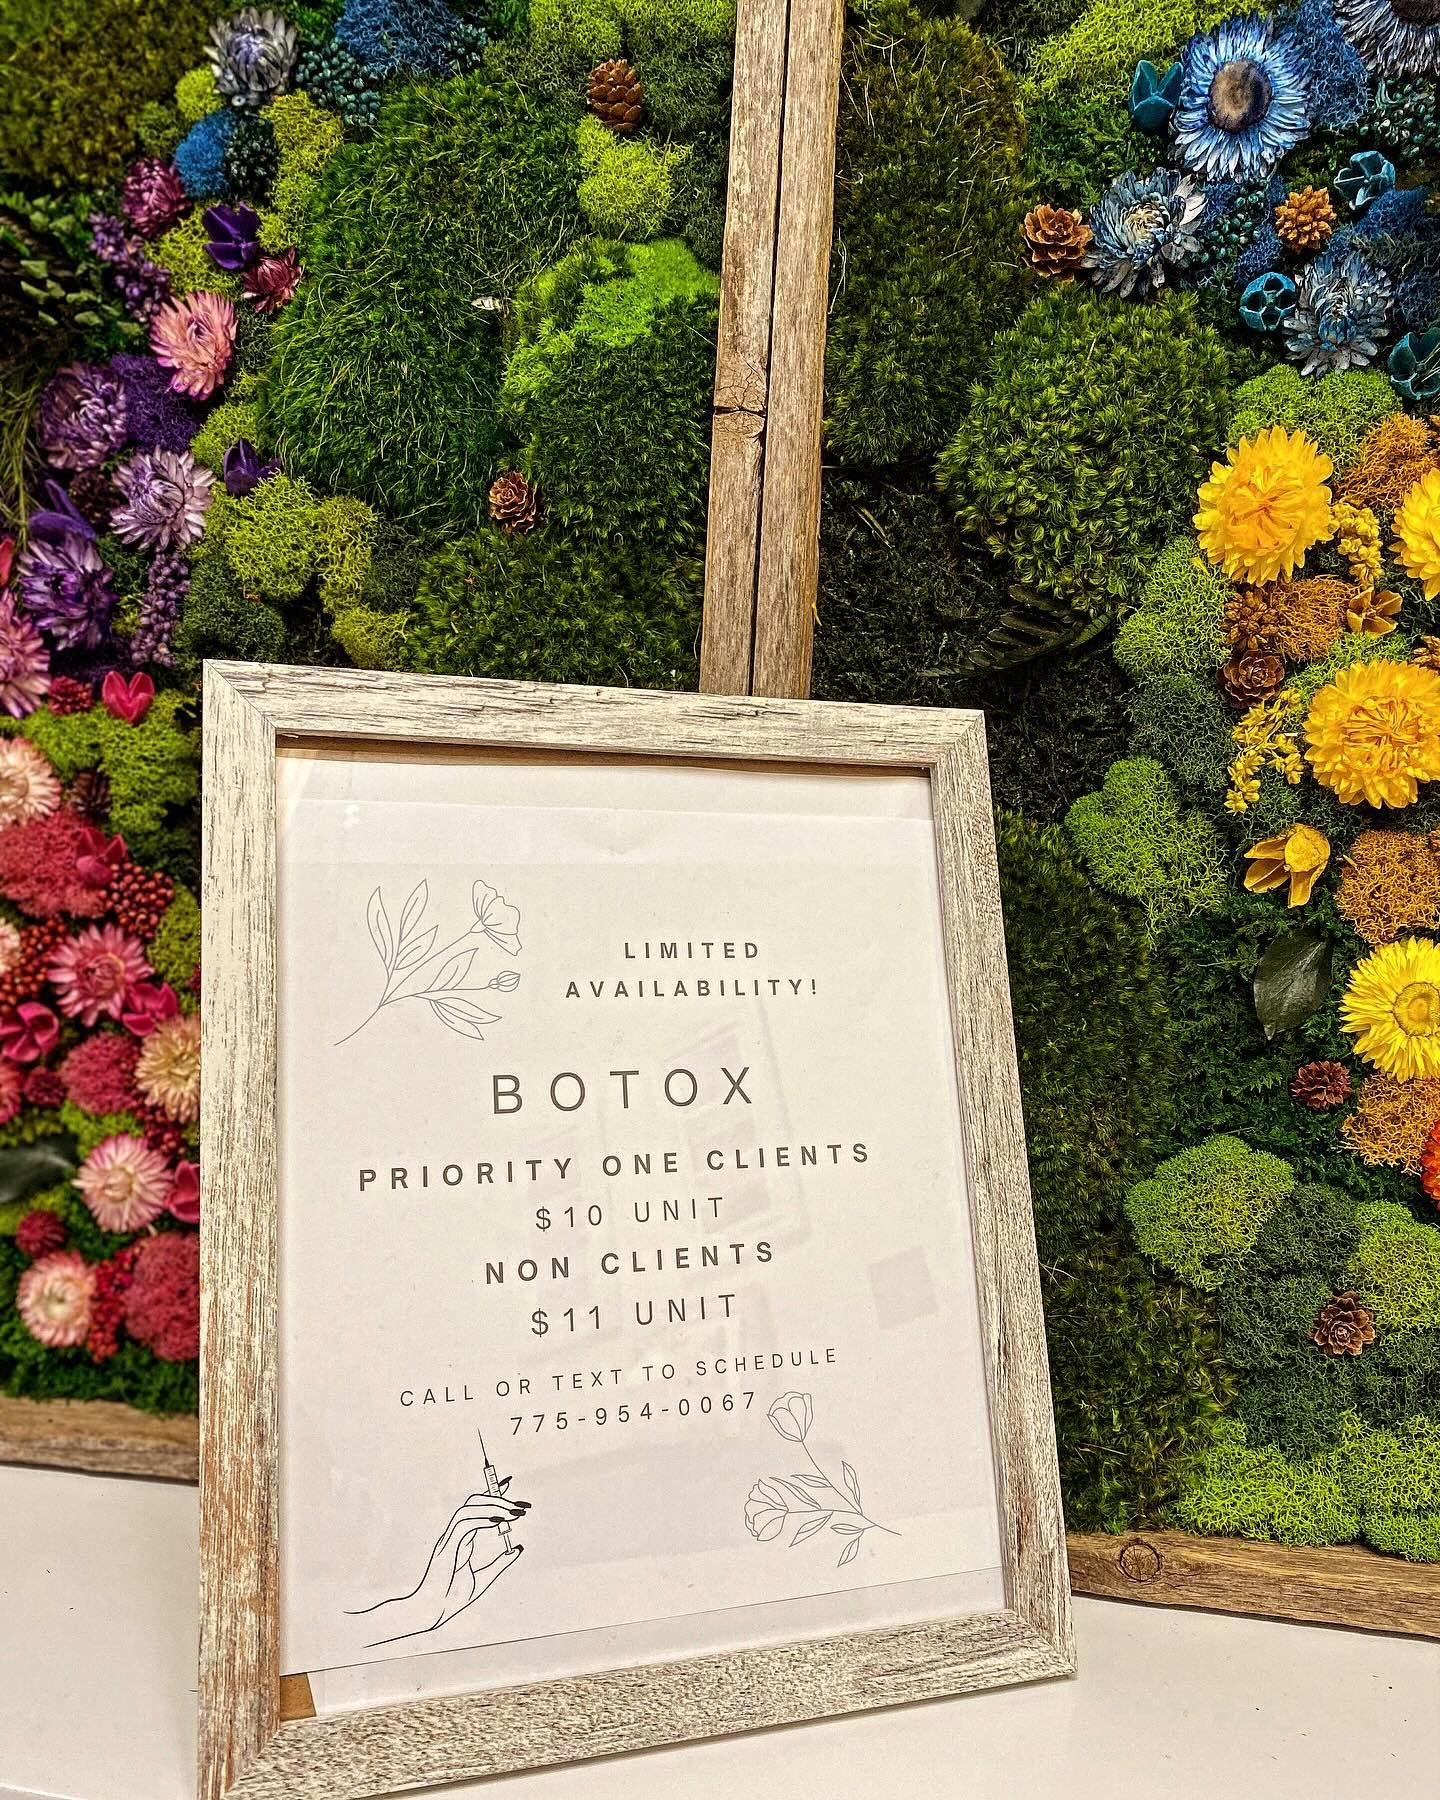 Should we continue offering Botox at the Hydrabar? We were thinking of adding a new space next door dedicated to it.. 🤫🤪💦